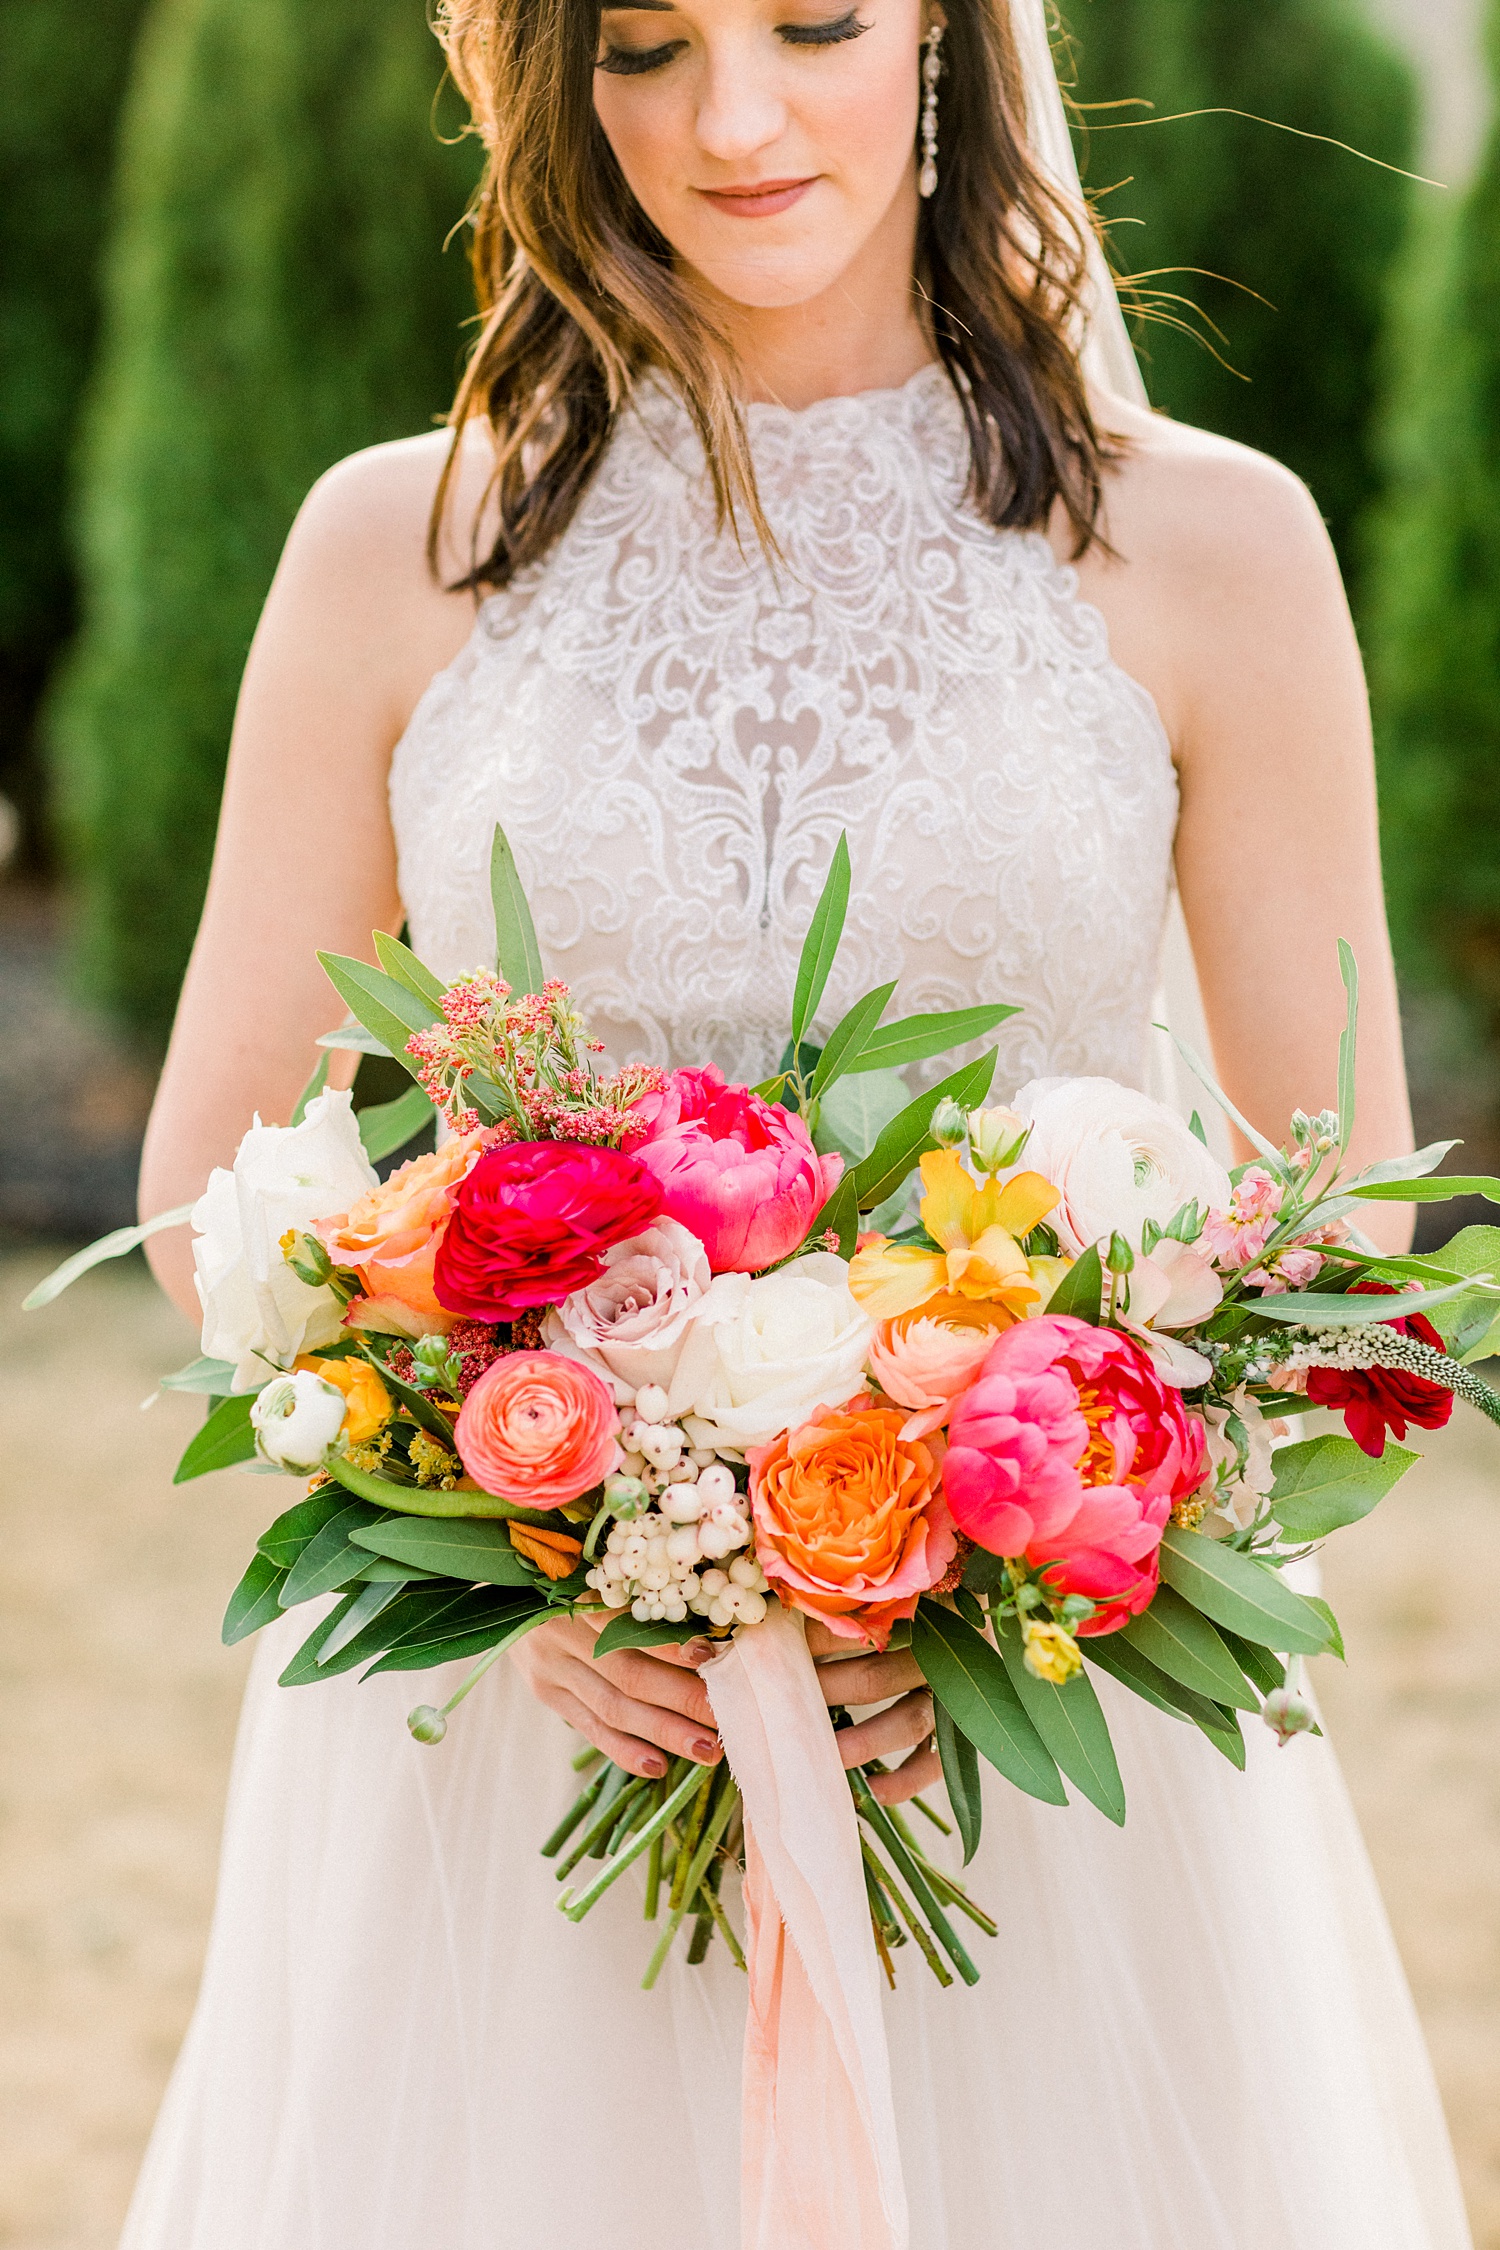 Oak Meadow Event Center bridal portraits with pink and orange bouquet